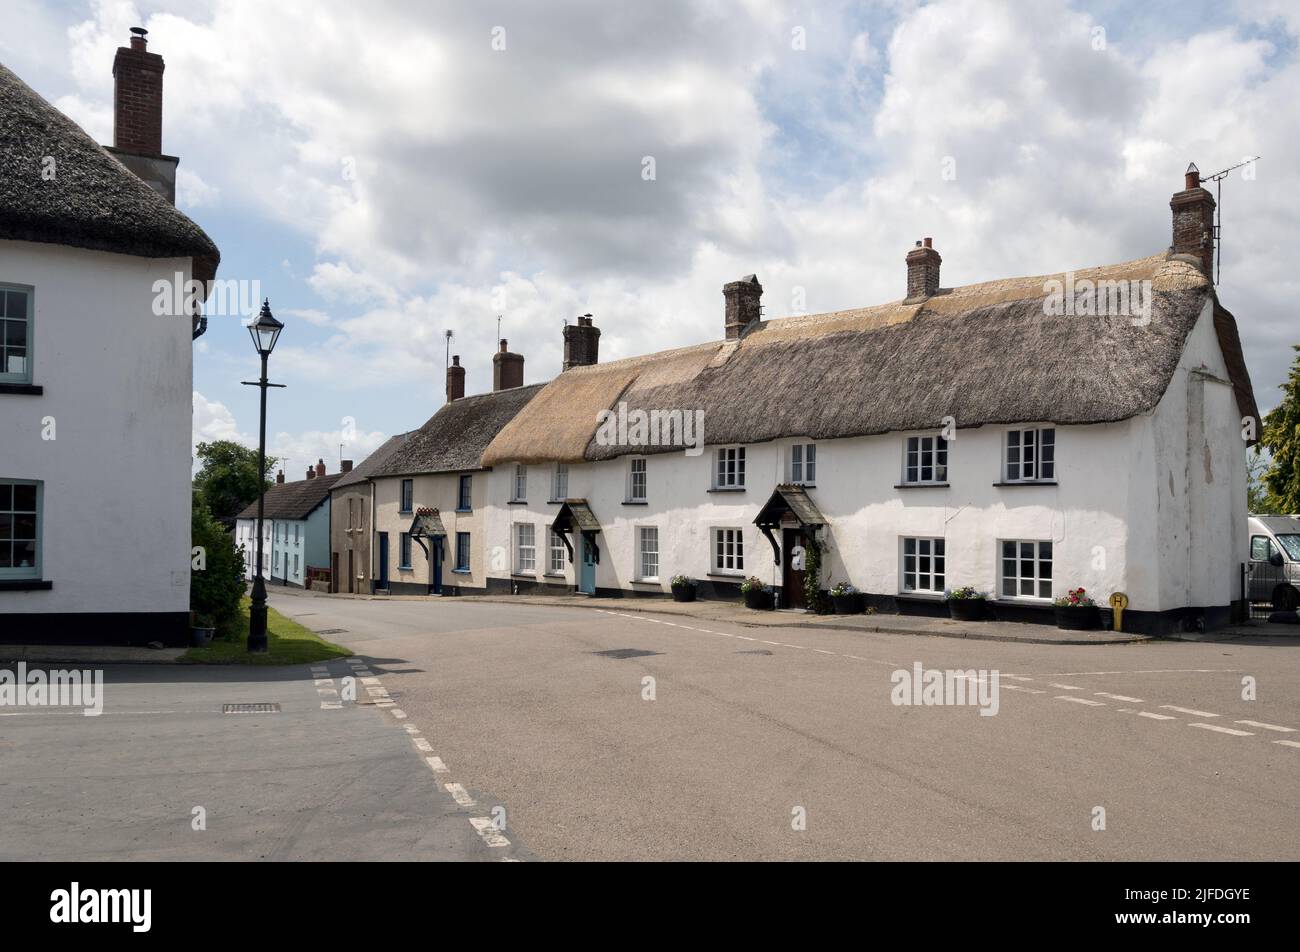 Thatched cottages in the village of Sheepwash, Devon Stock Photo